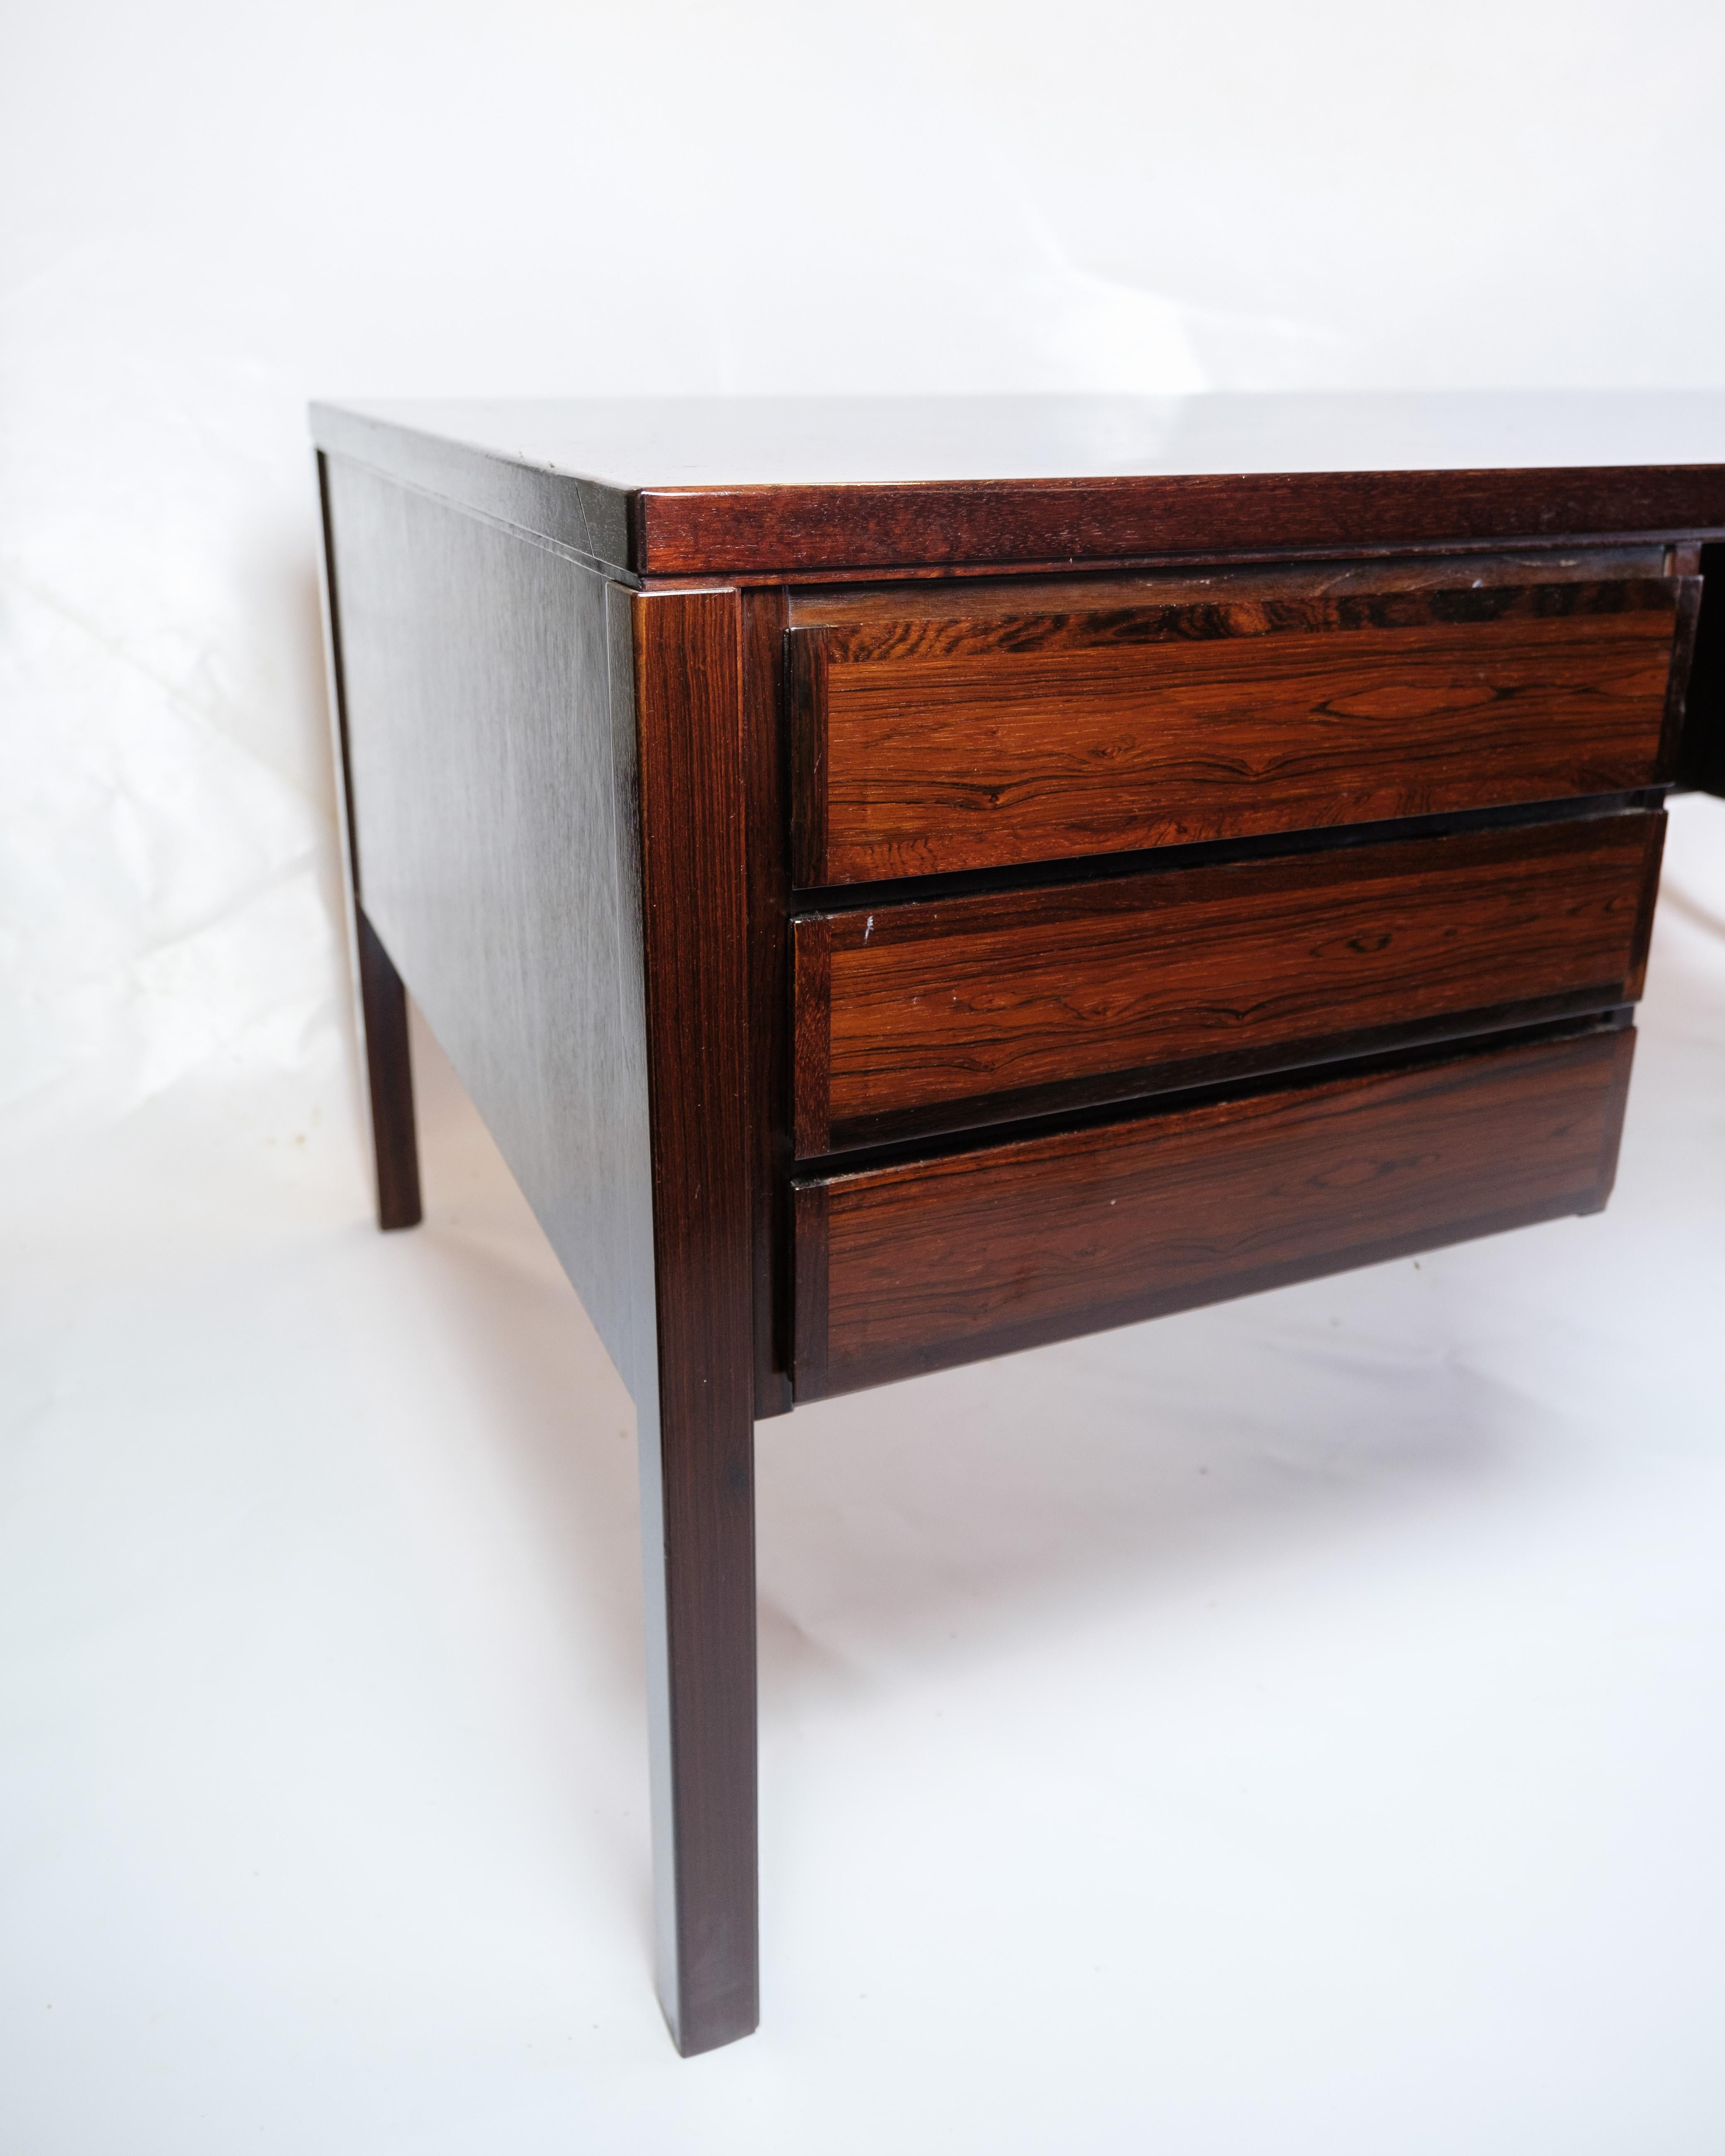 Mid-Century Modern Desk Made In Rosewood By Omann Jun. Furniture Factory From 1960s For Sale